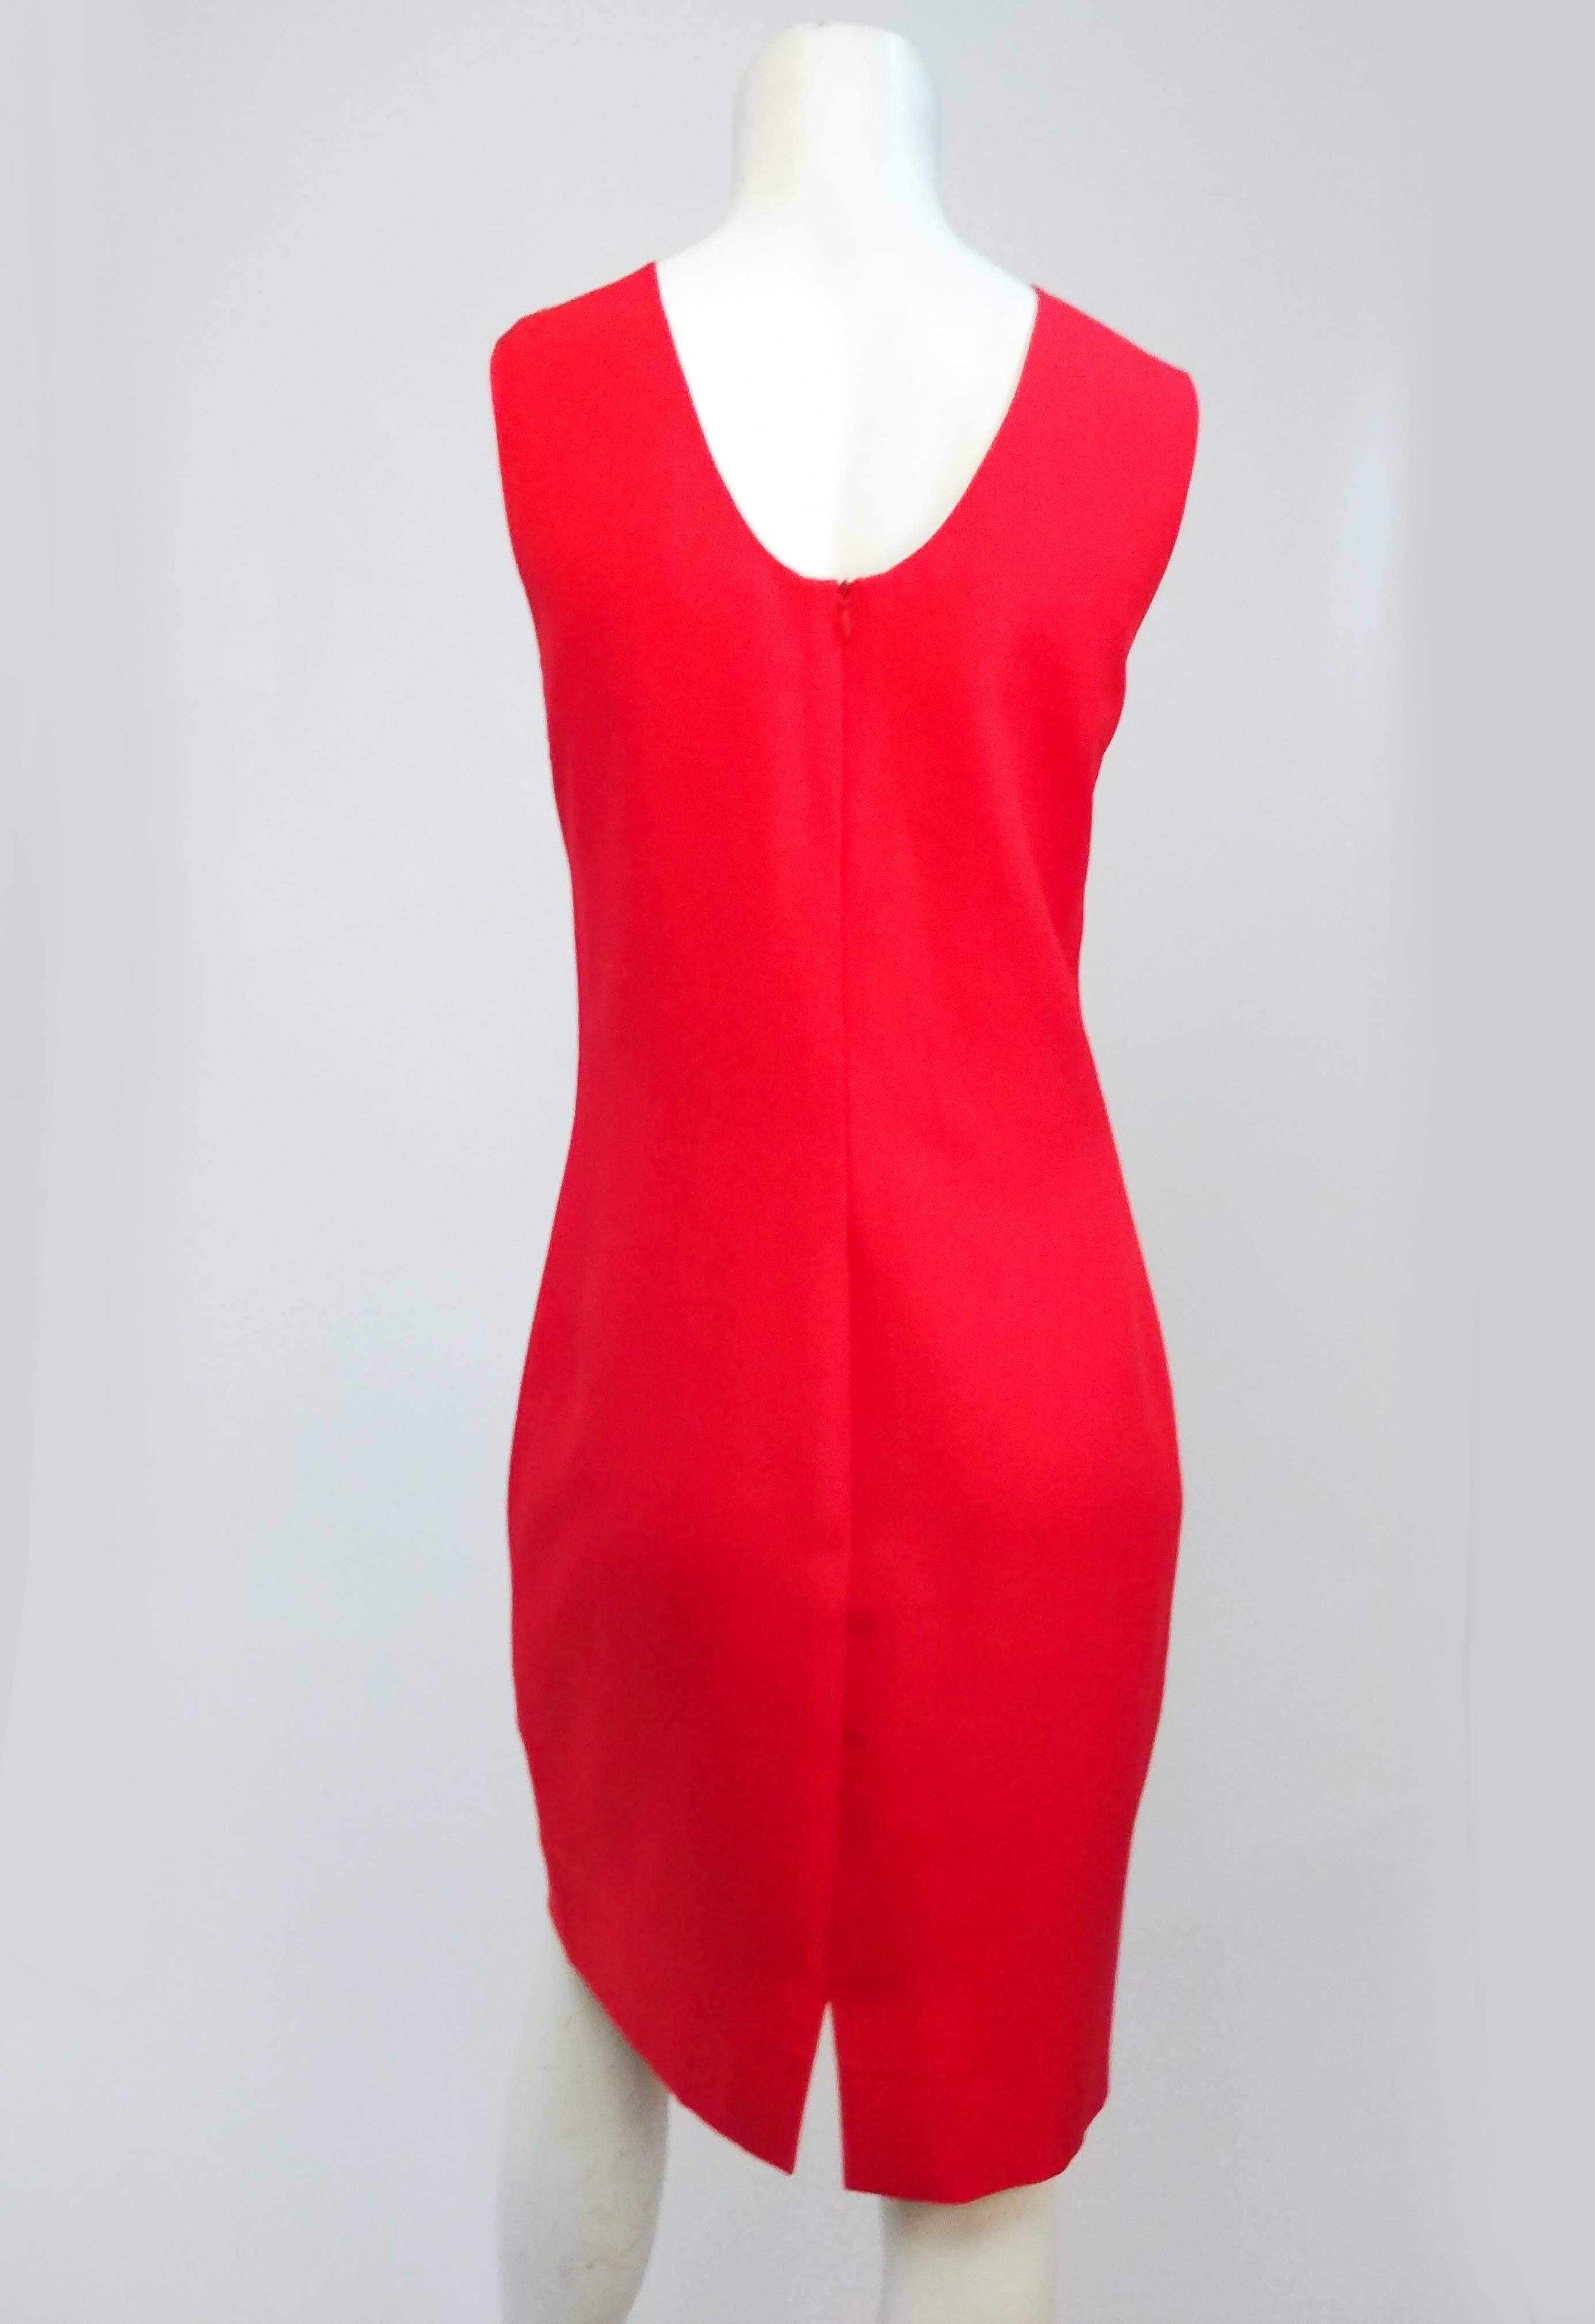 Yves Saint Laurent Rive Gauche Red Sheath Dress In Good Condition For Sale In San Francisco, CA